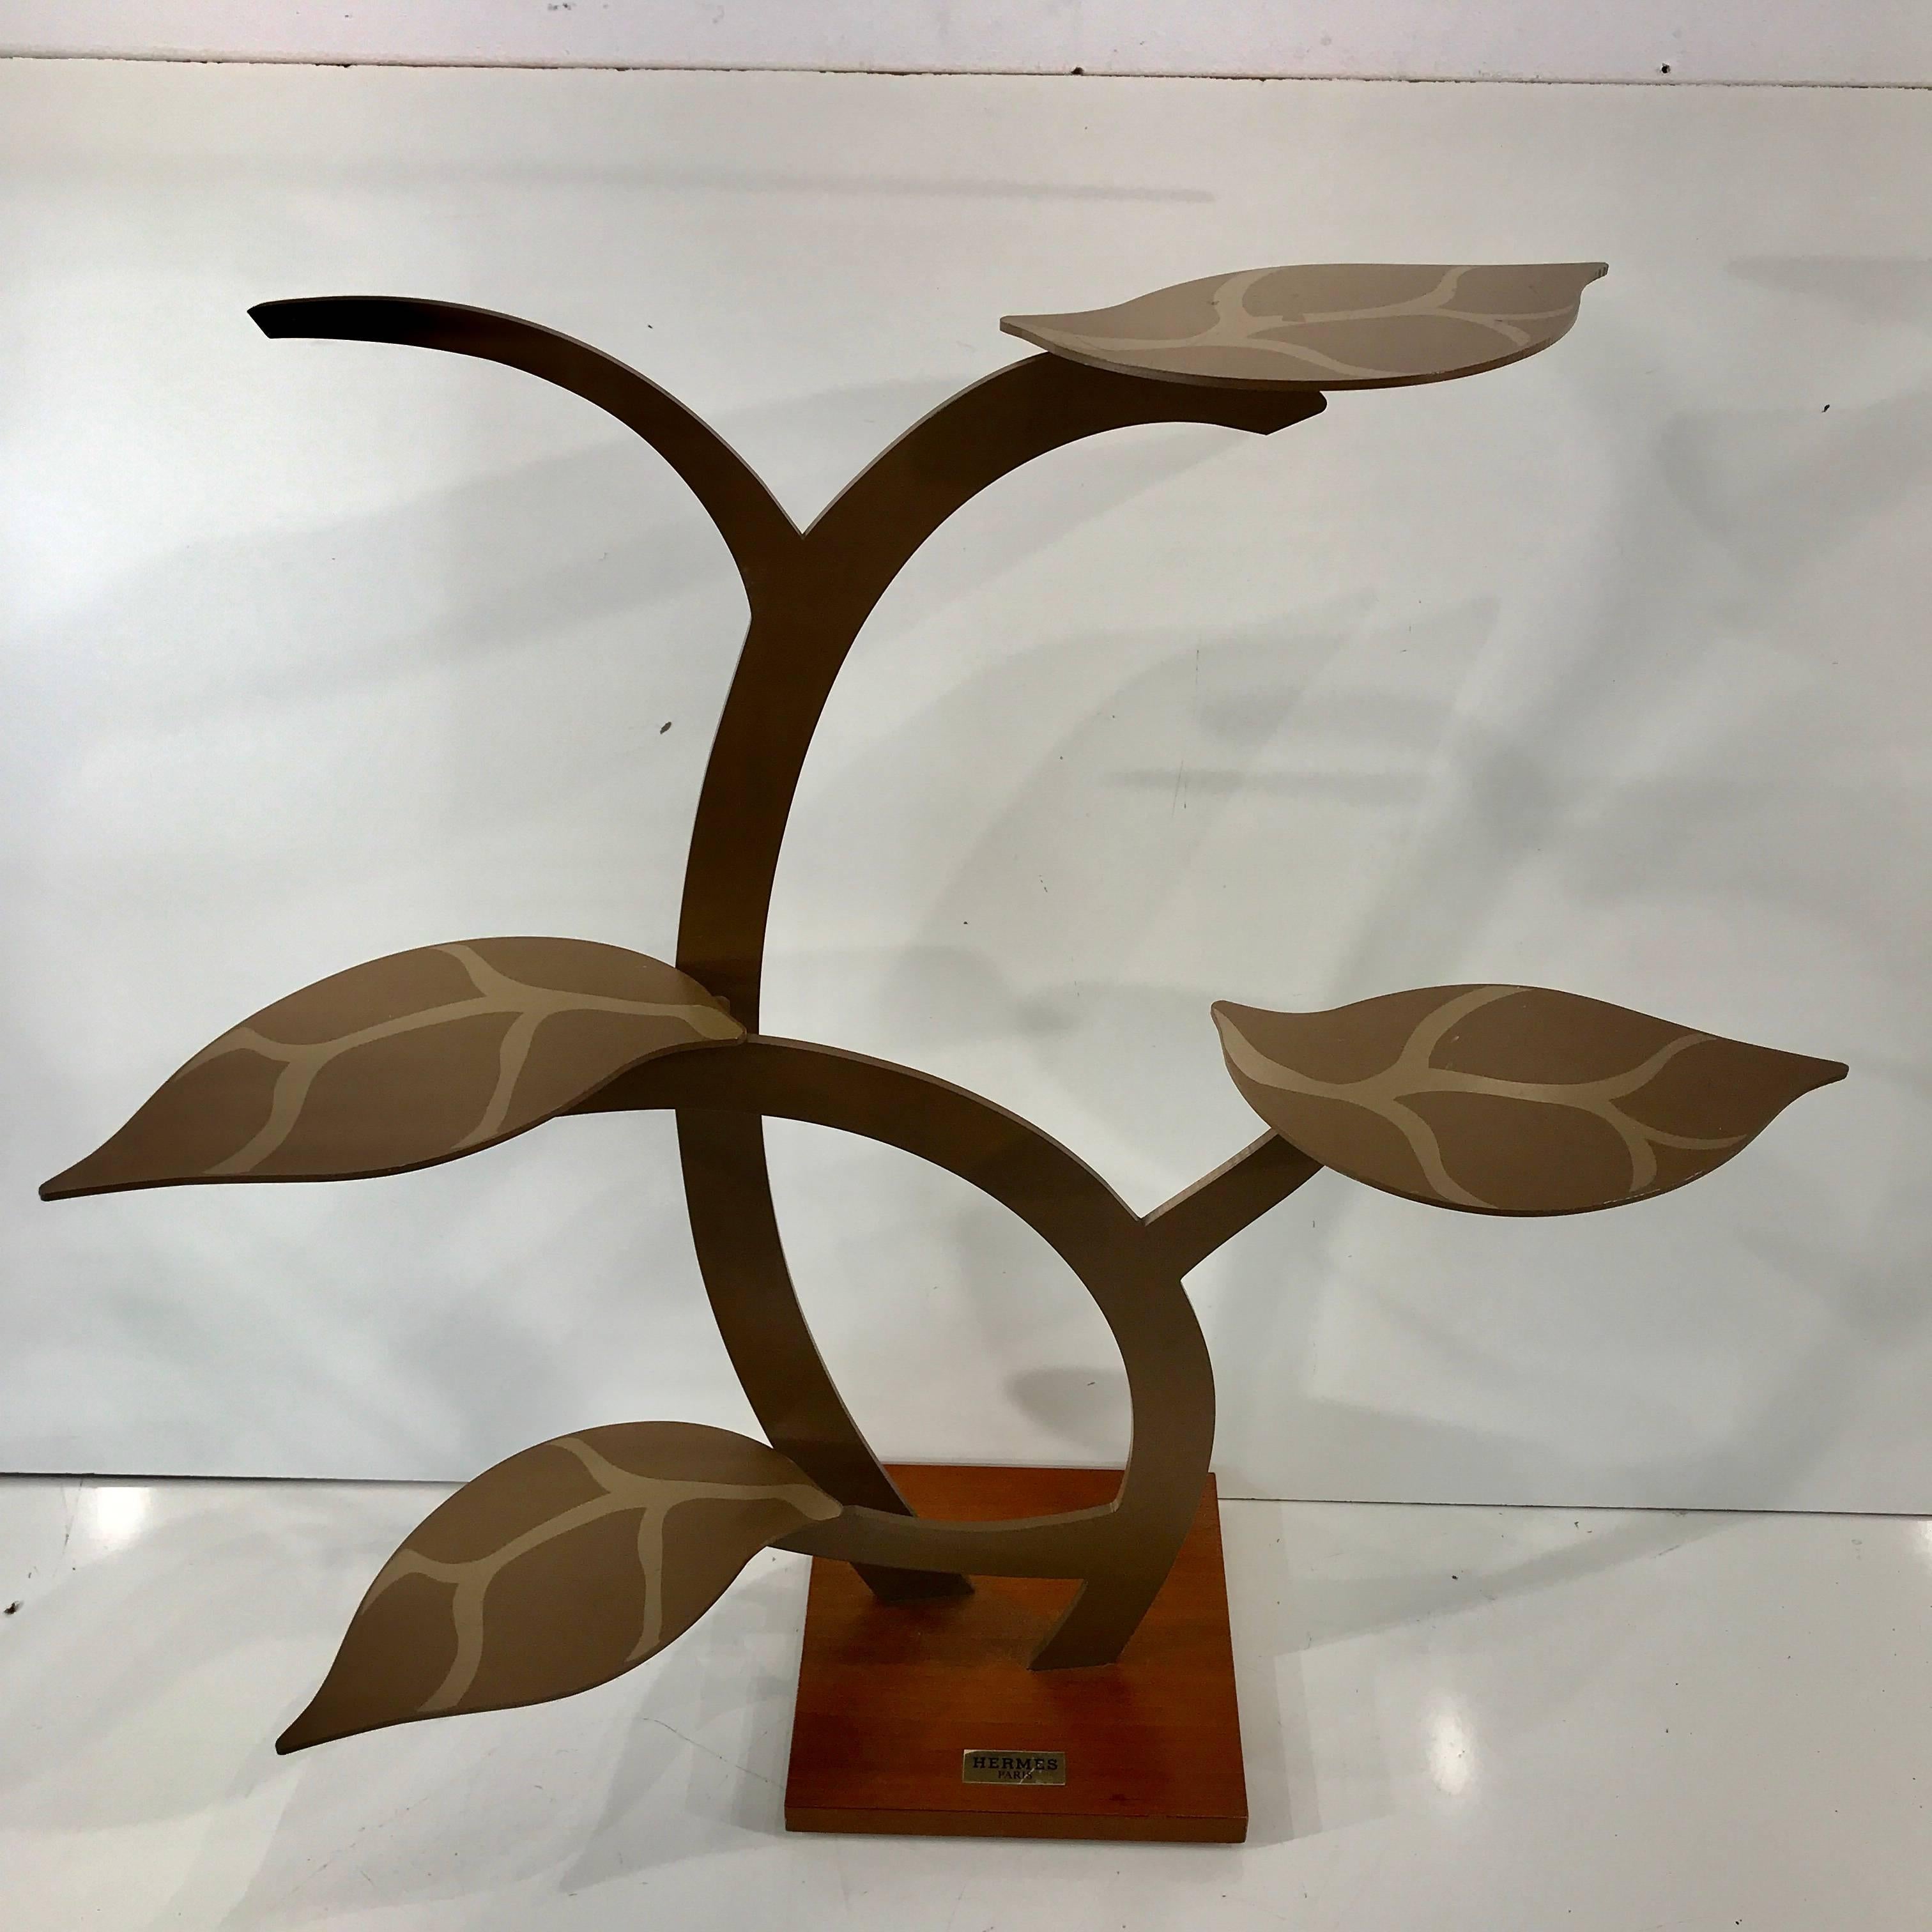 Vintage Hermes display stand, this remarkable tree is made of enameled and polychromed metal mounted on a square wood base. The leaves serve as display surfaces and are removable. Each leaf measures 8.5